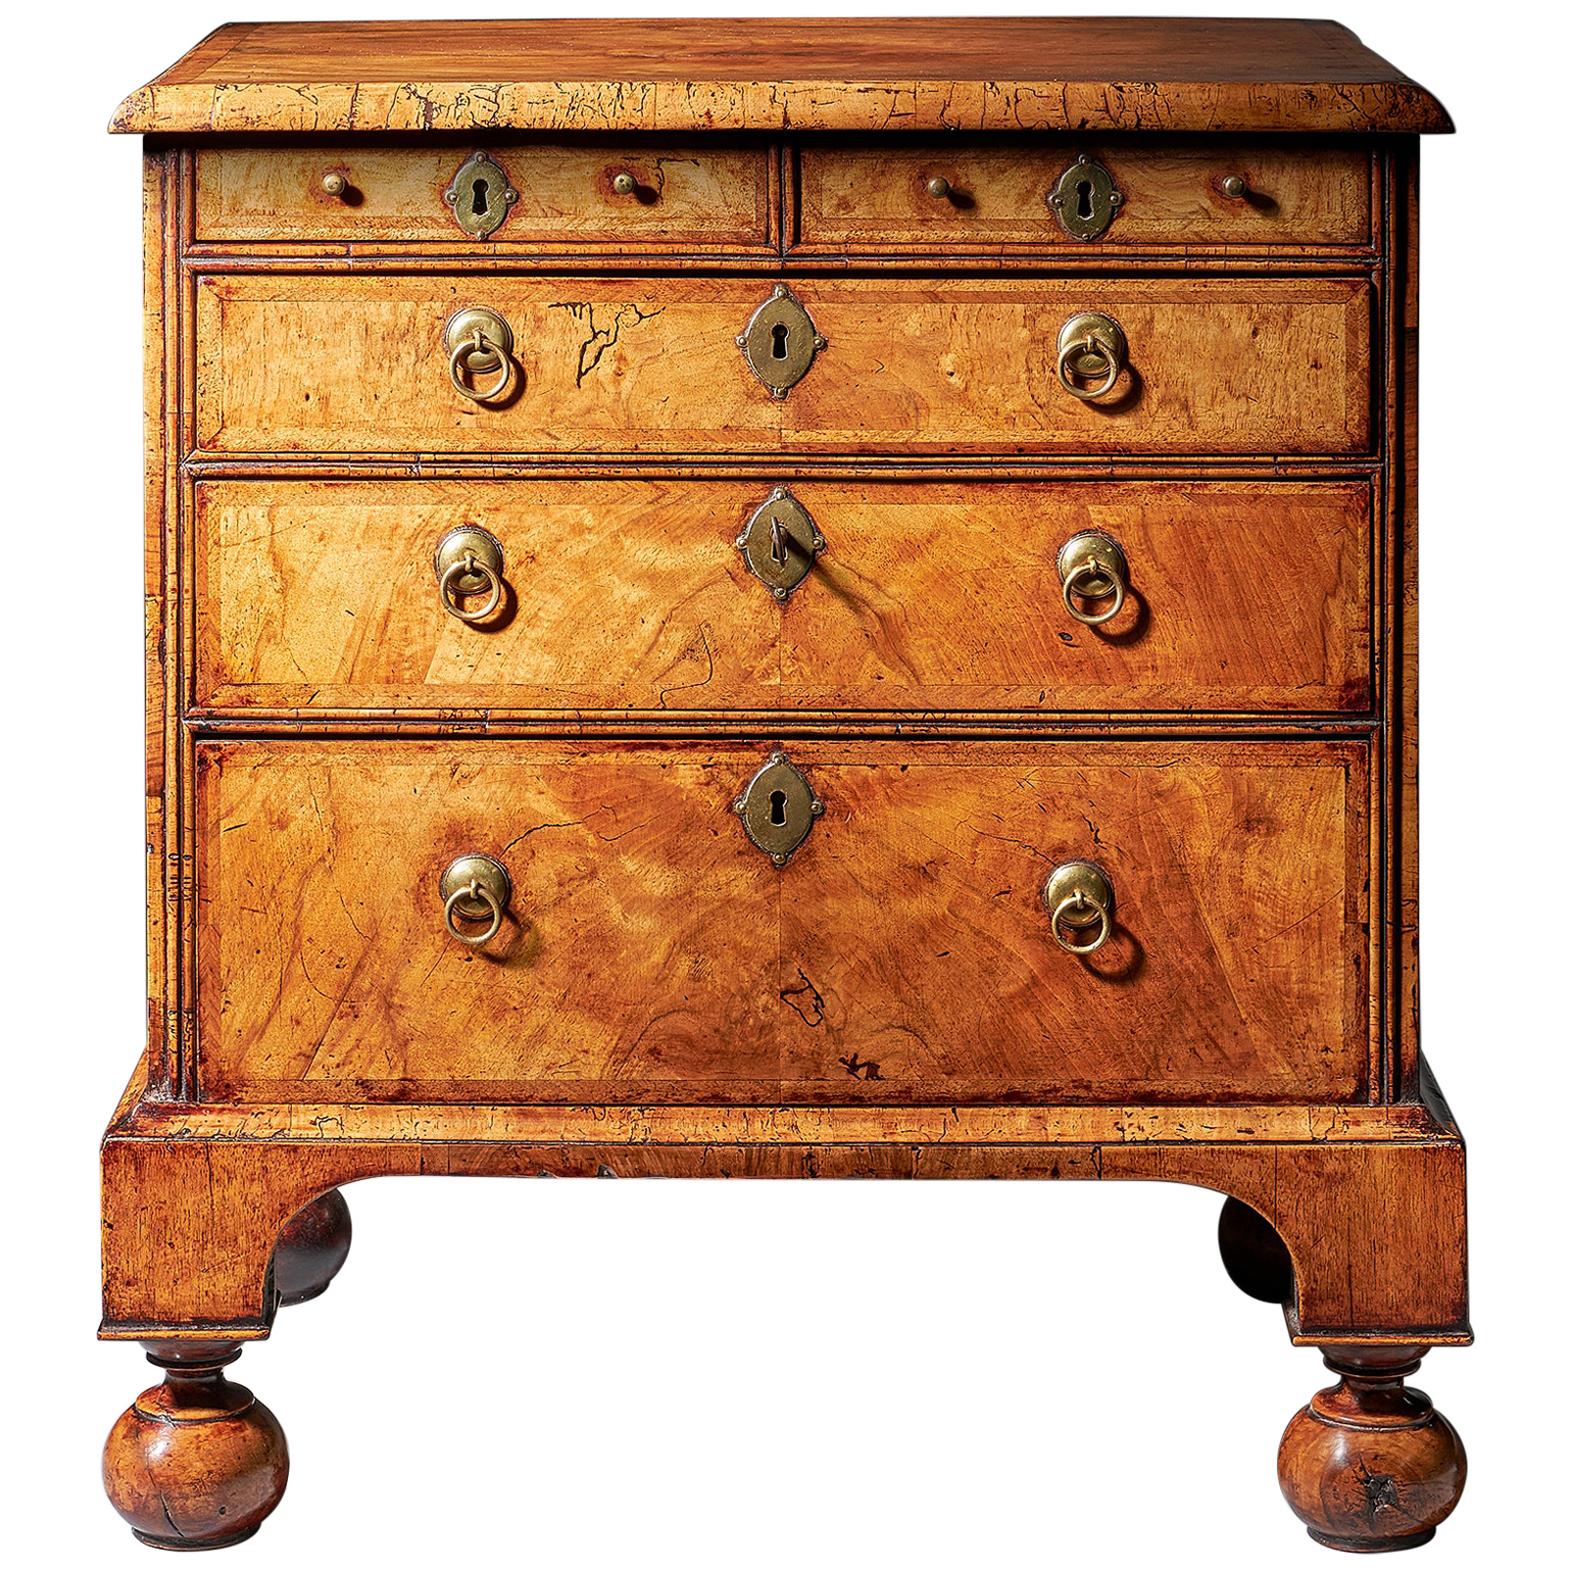 An extremely rare George I walnut chest of small proportions on ball and bracket 15